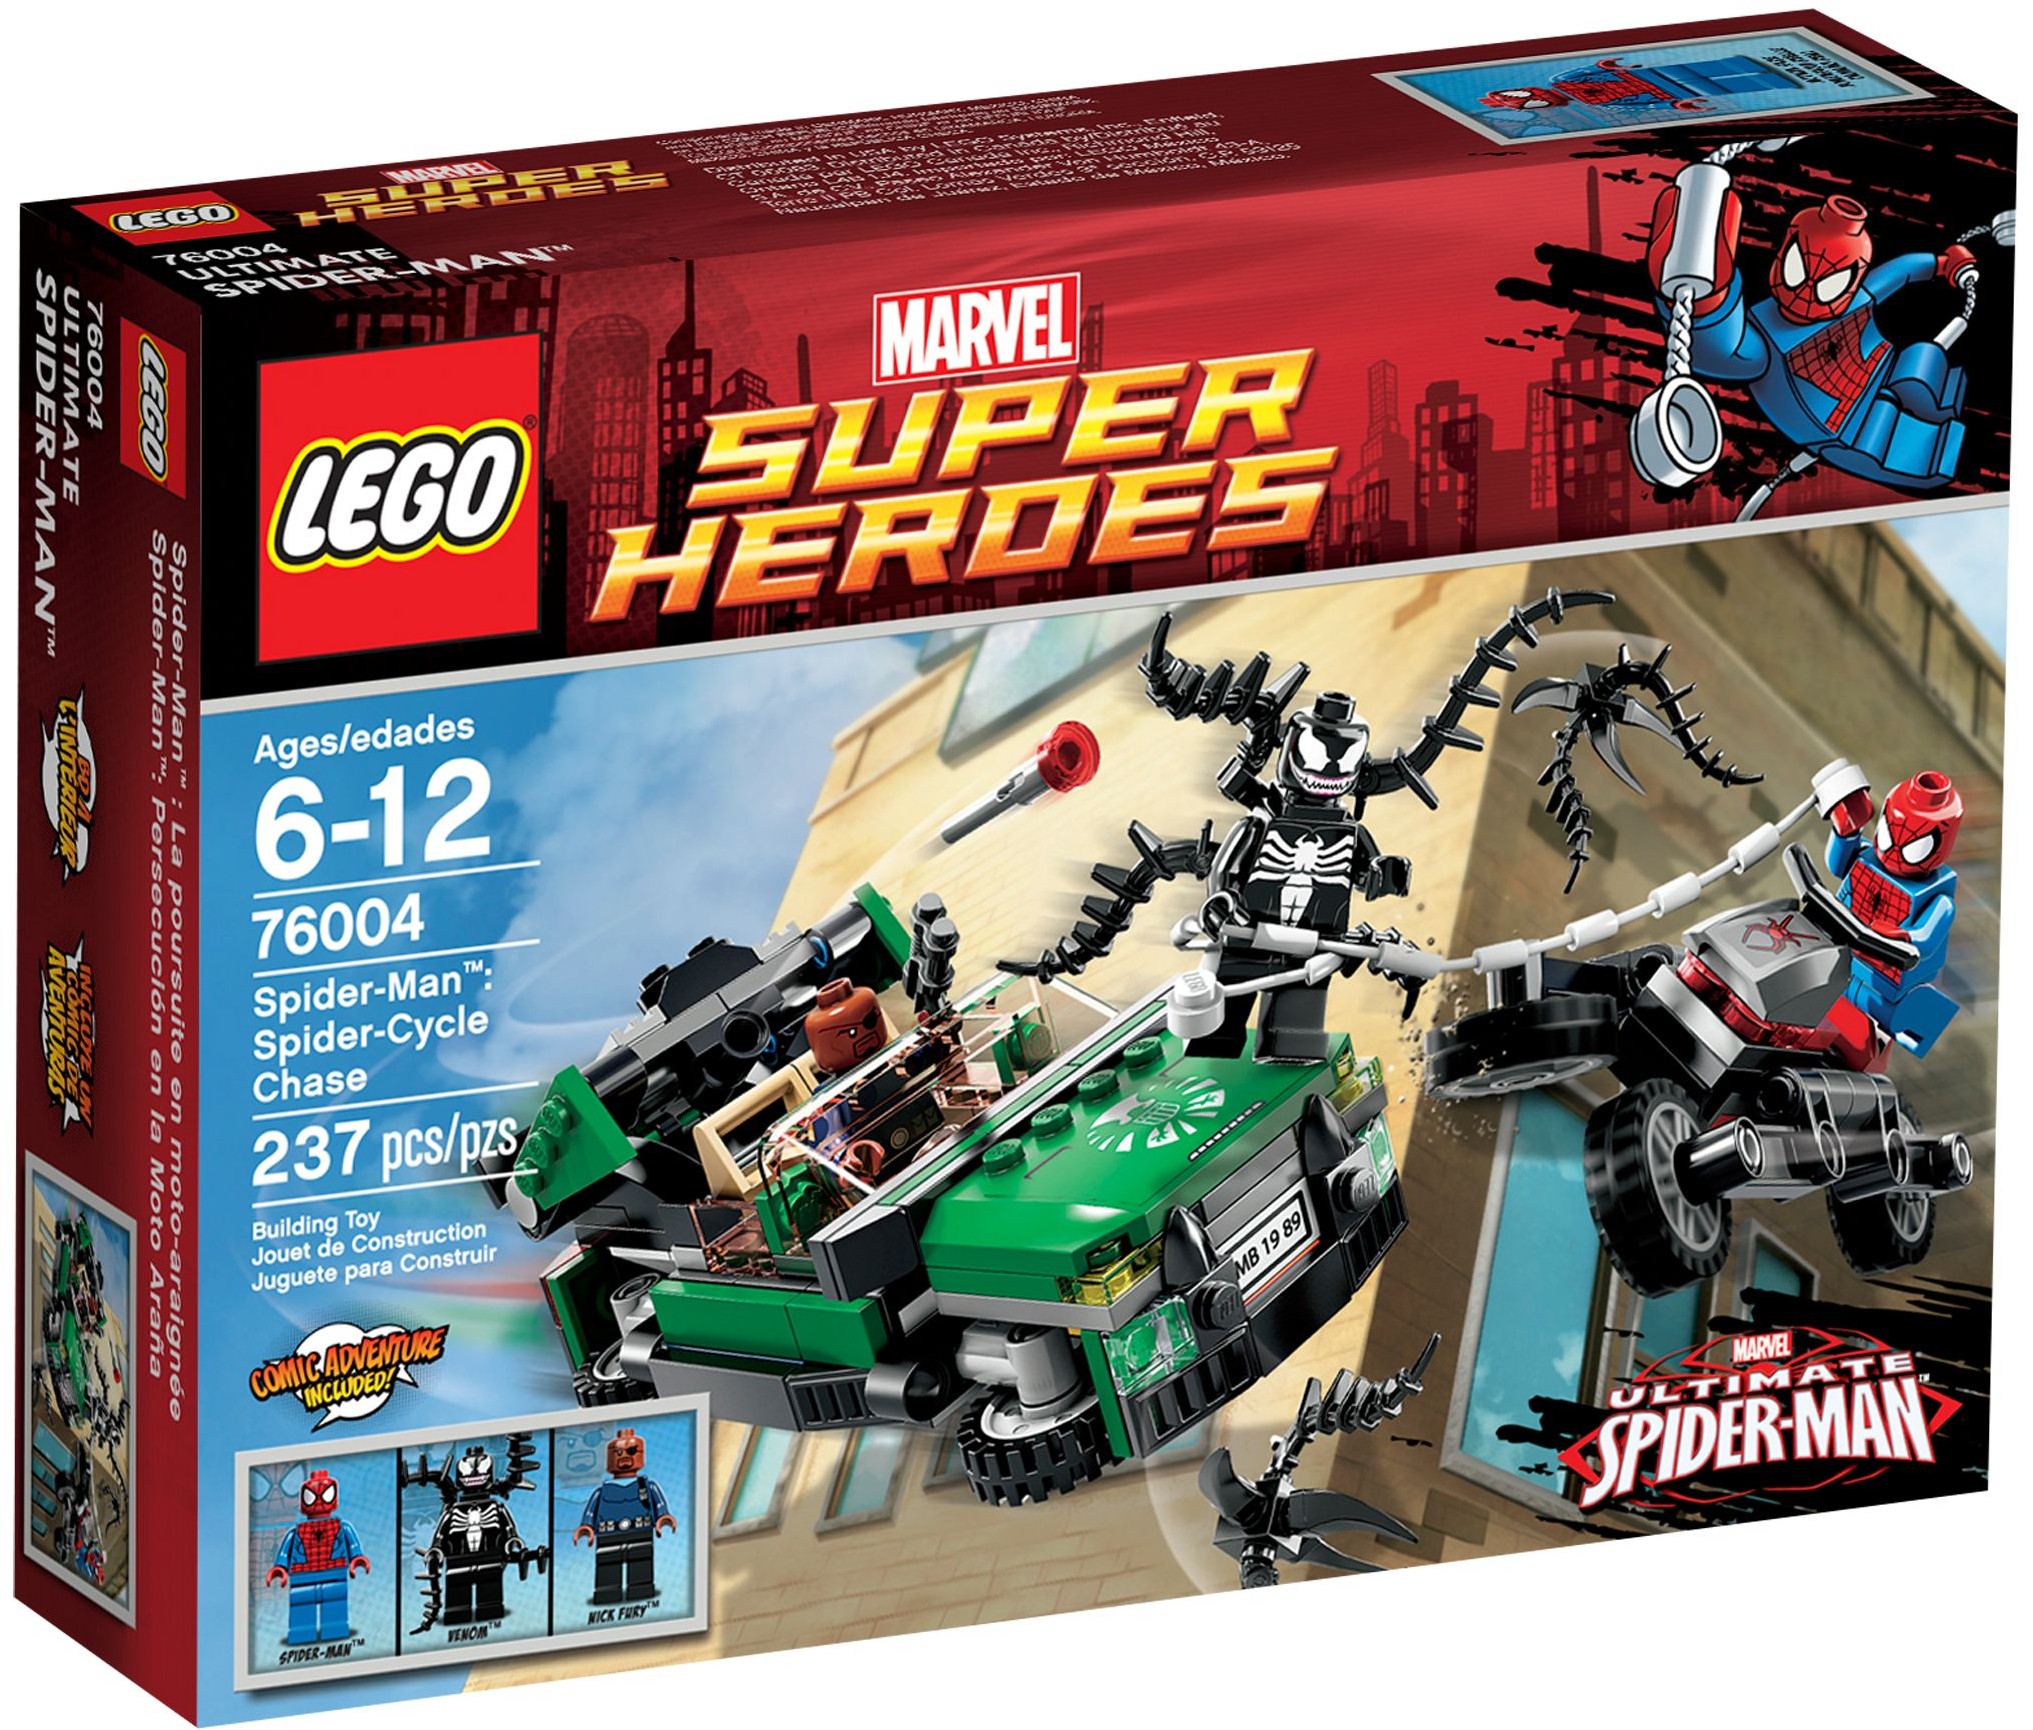 *NEW* LEGO Spider-Man Minifigure  from set 76004 Spider-Cycle Chase Spiderman 